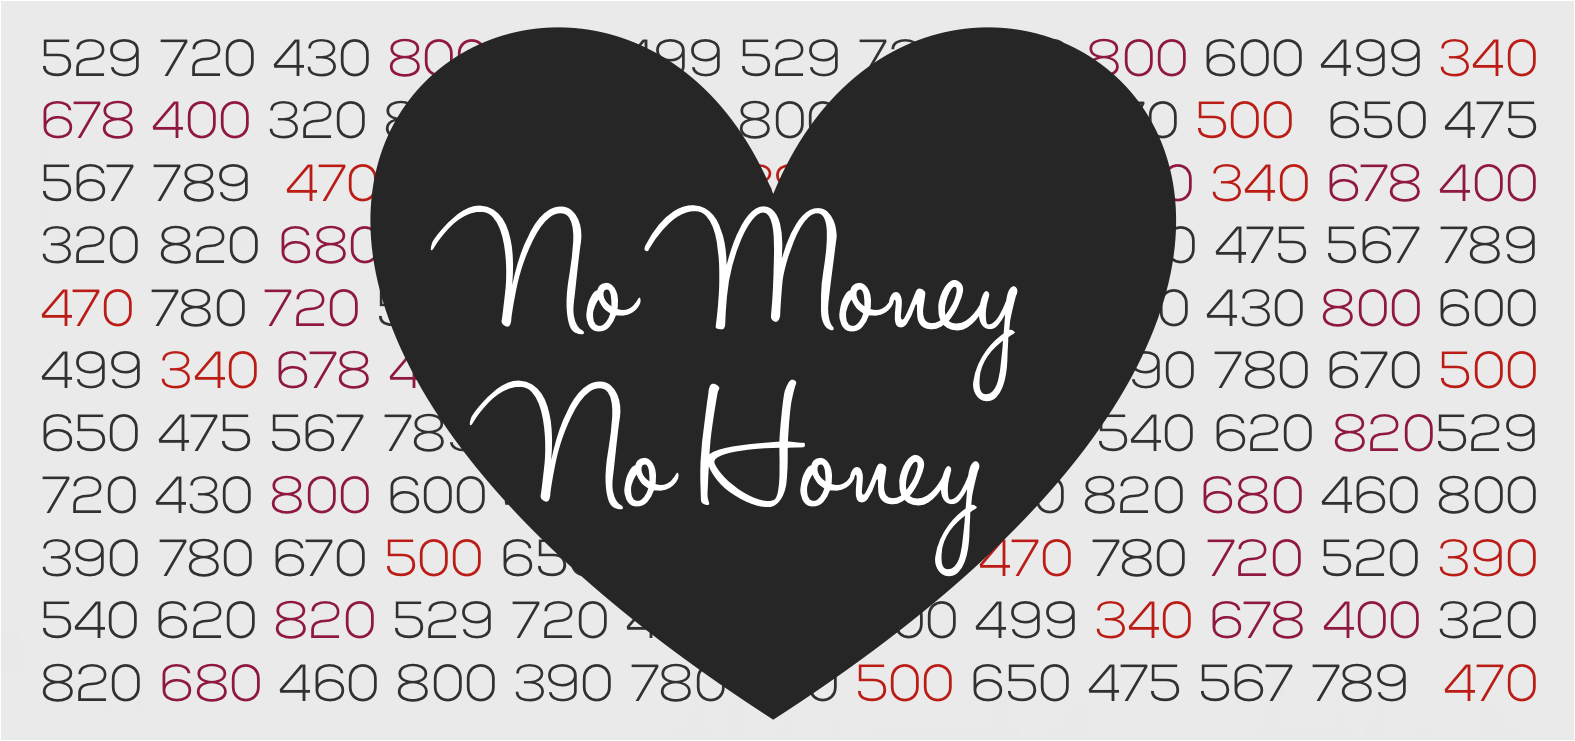 Talking Love & Money: A Trend is Developing That Disturbs Me